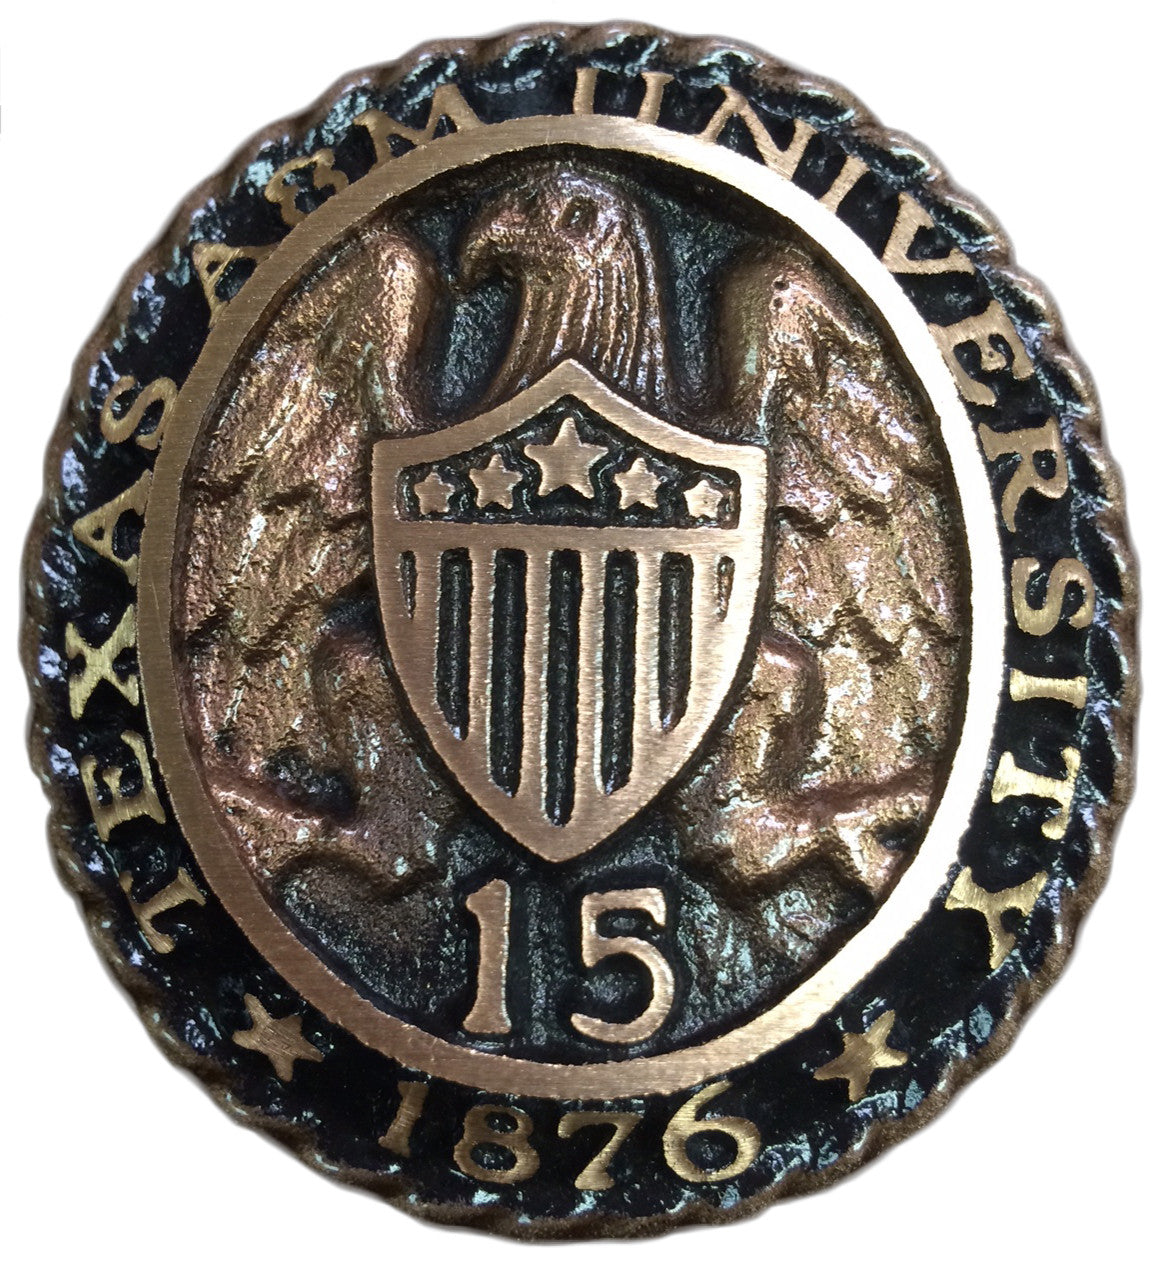 Aggie Class Year Ring Crest Paperweight